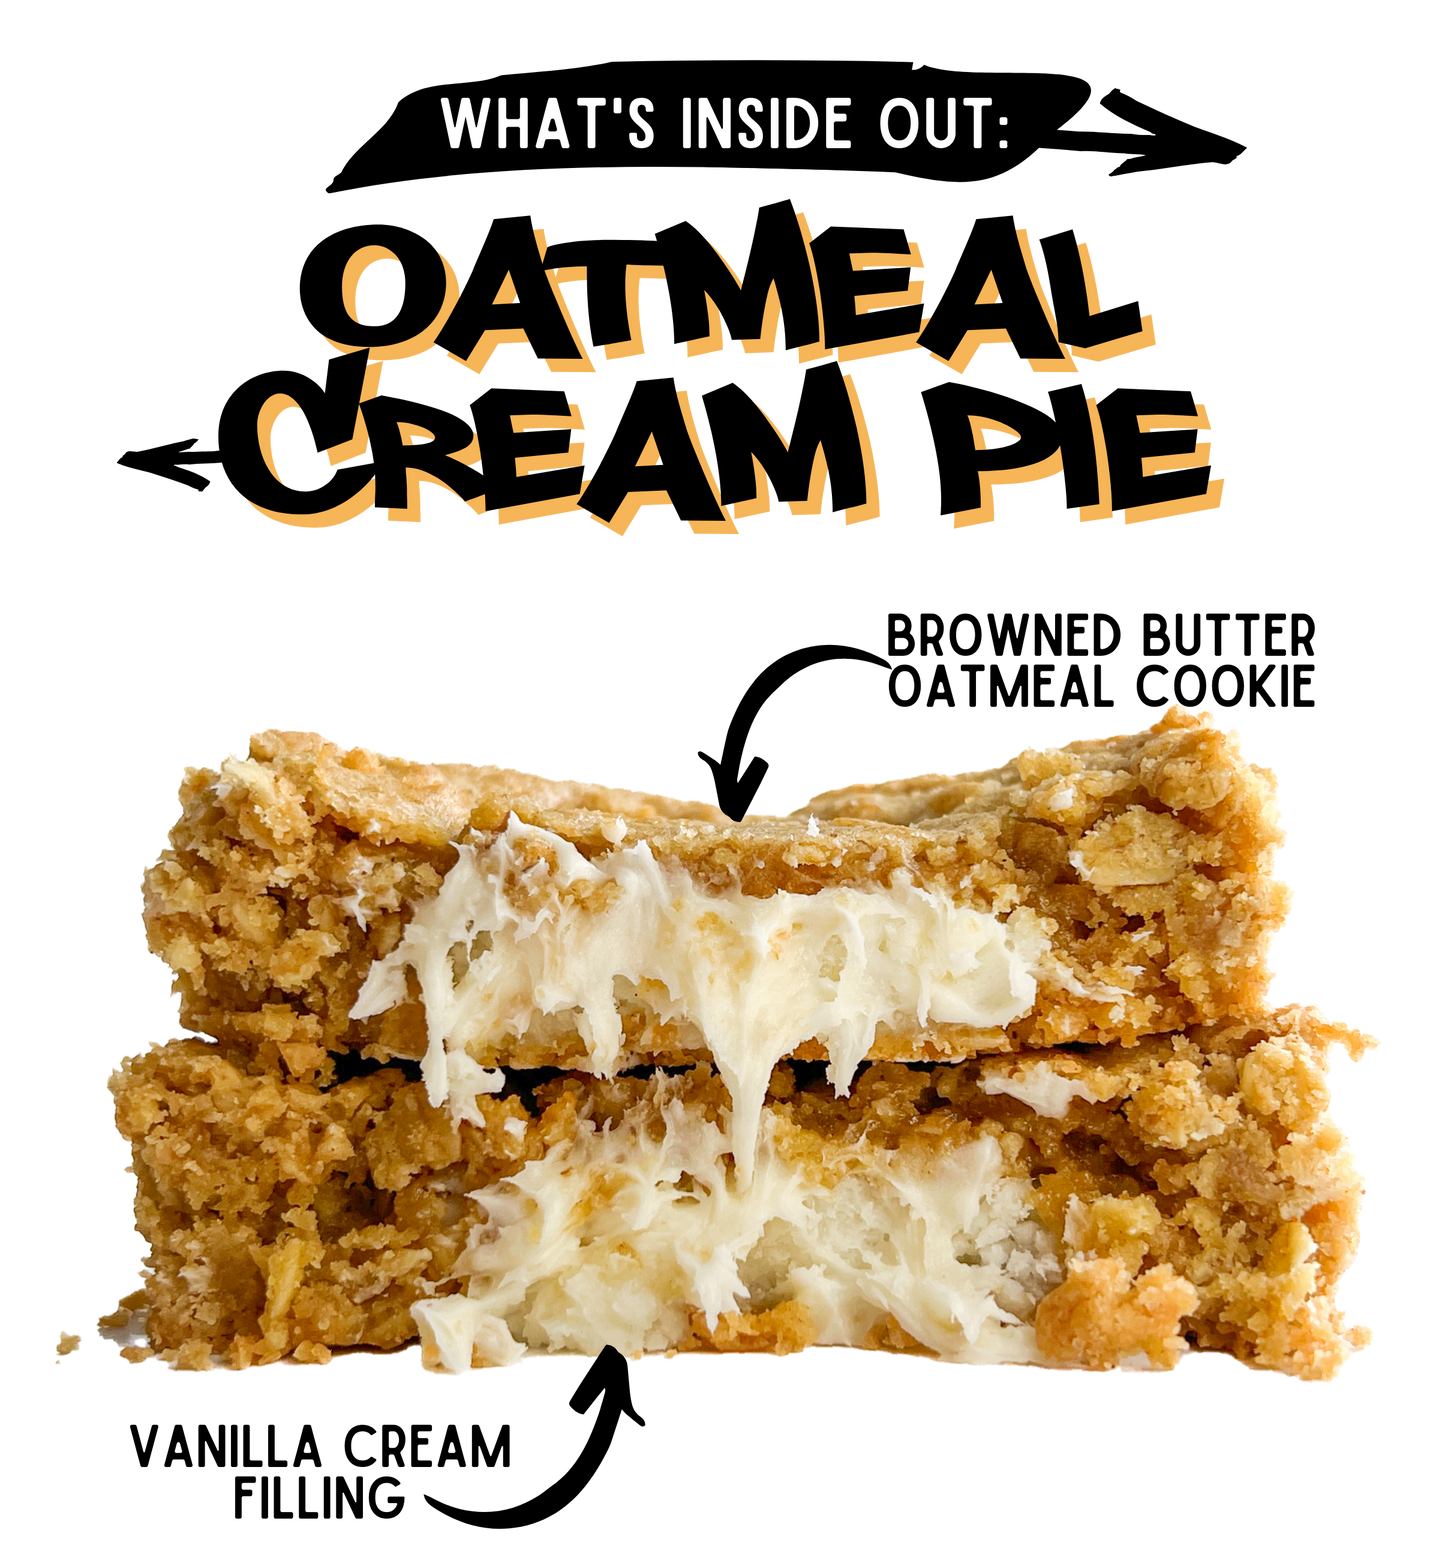 Inside Out Cookie whats inside oatmeal cream pie